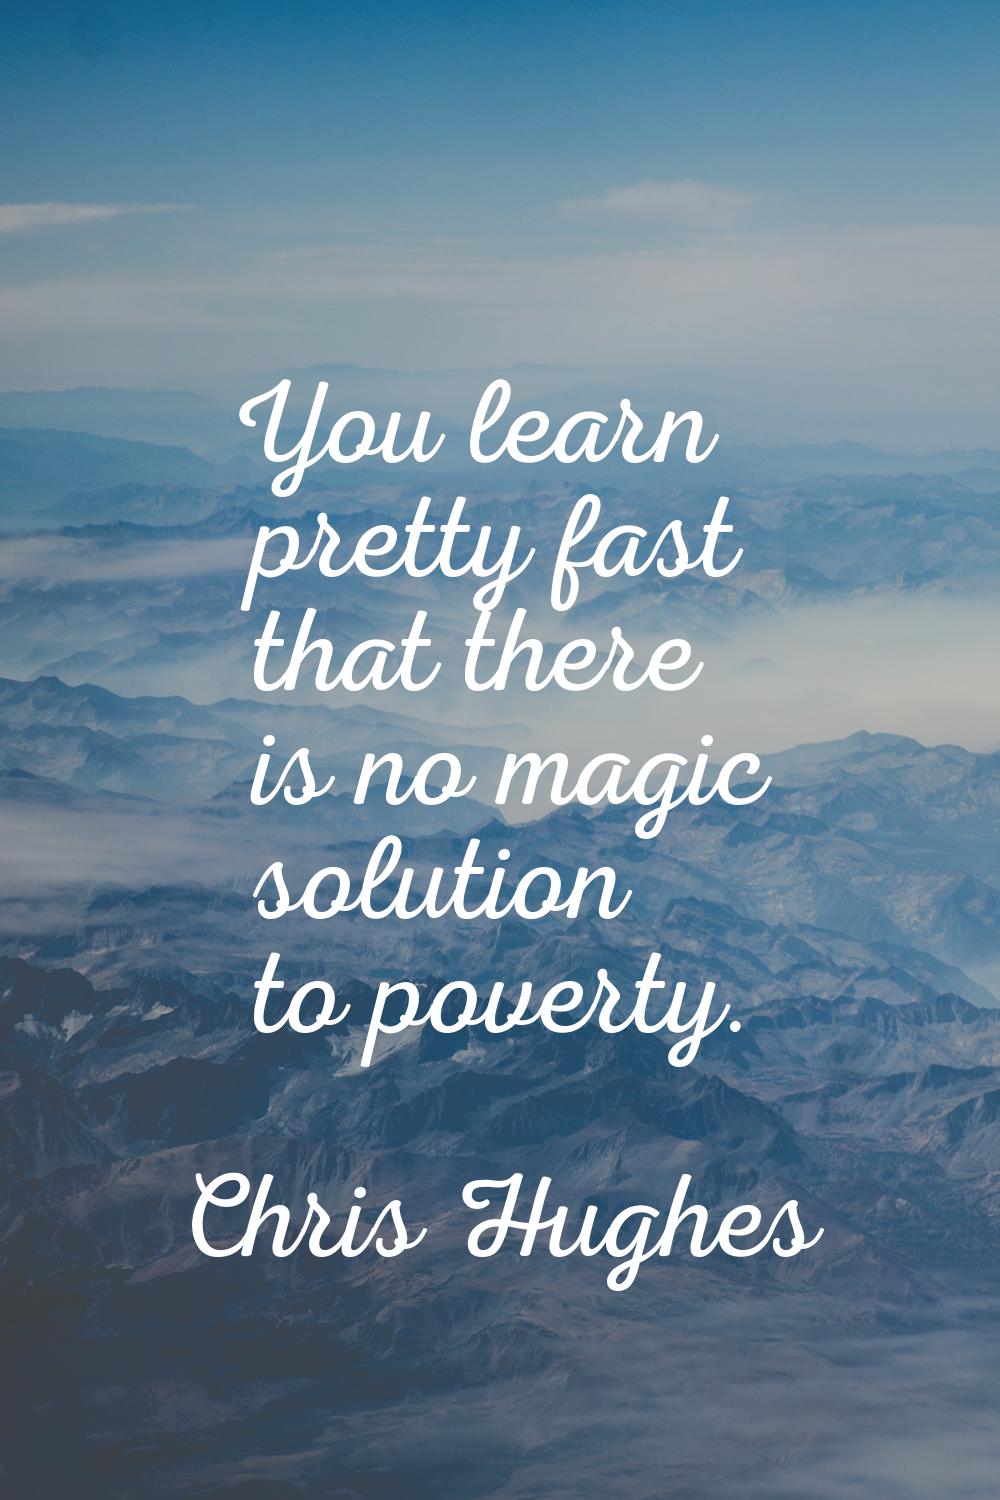 You learn pretty fast that there is no magic solution to poverty.